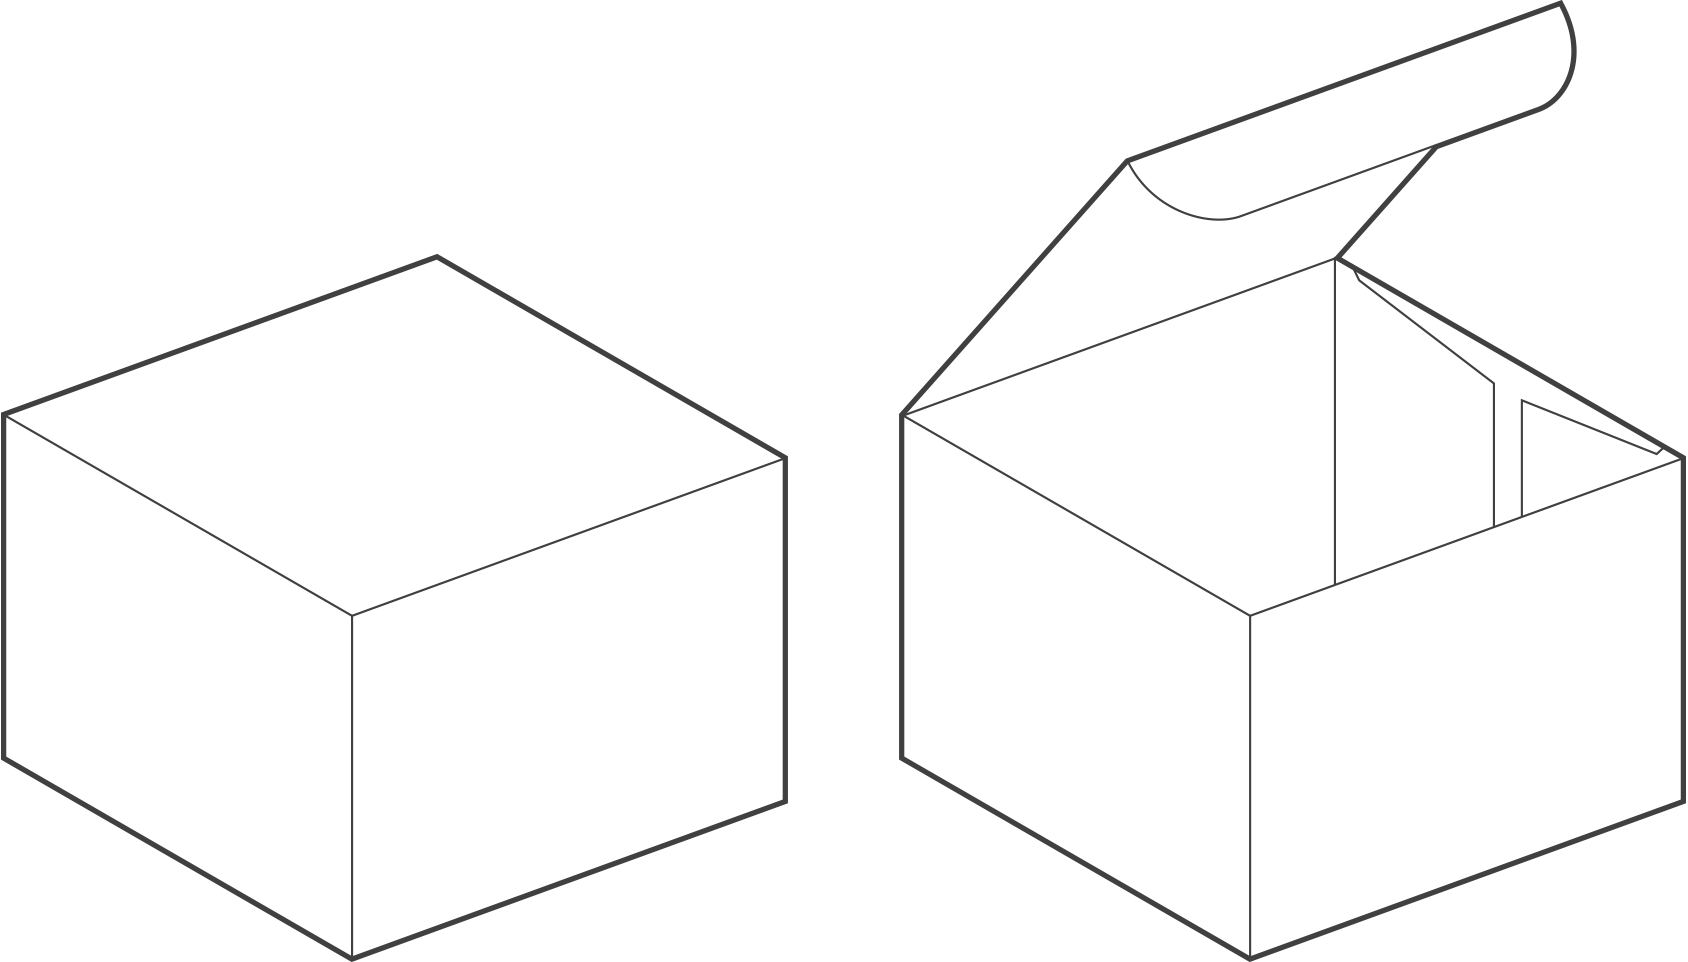 A drawing of this type of packaging